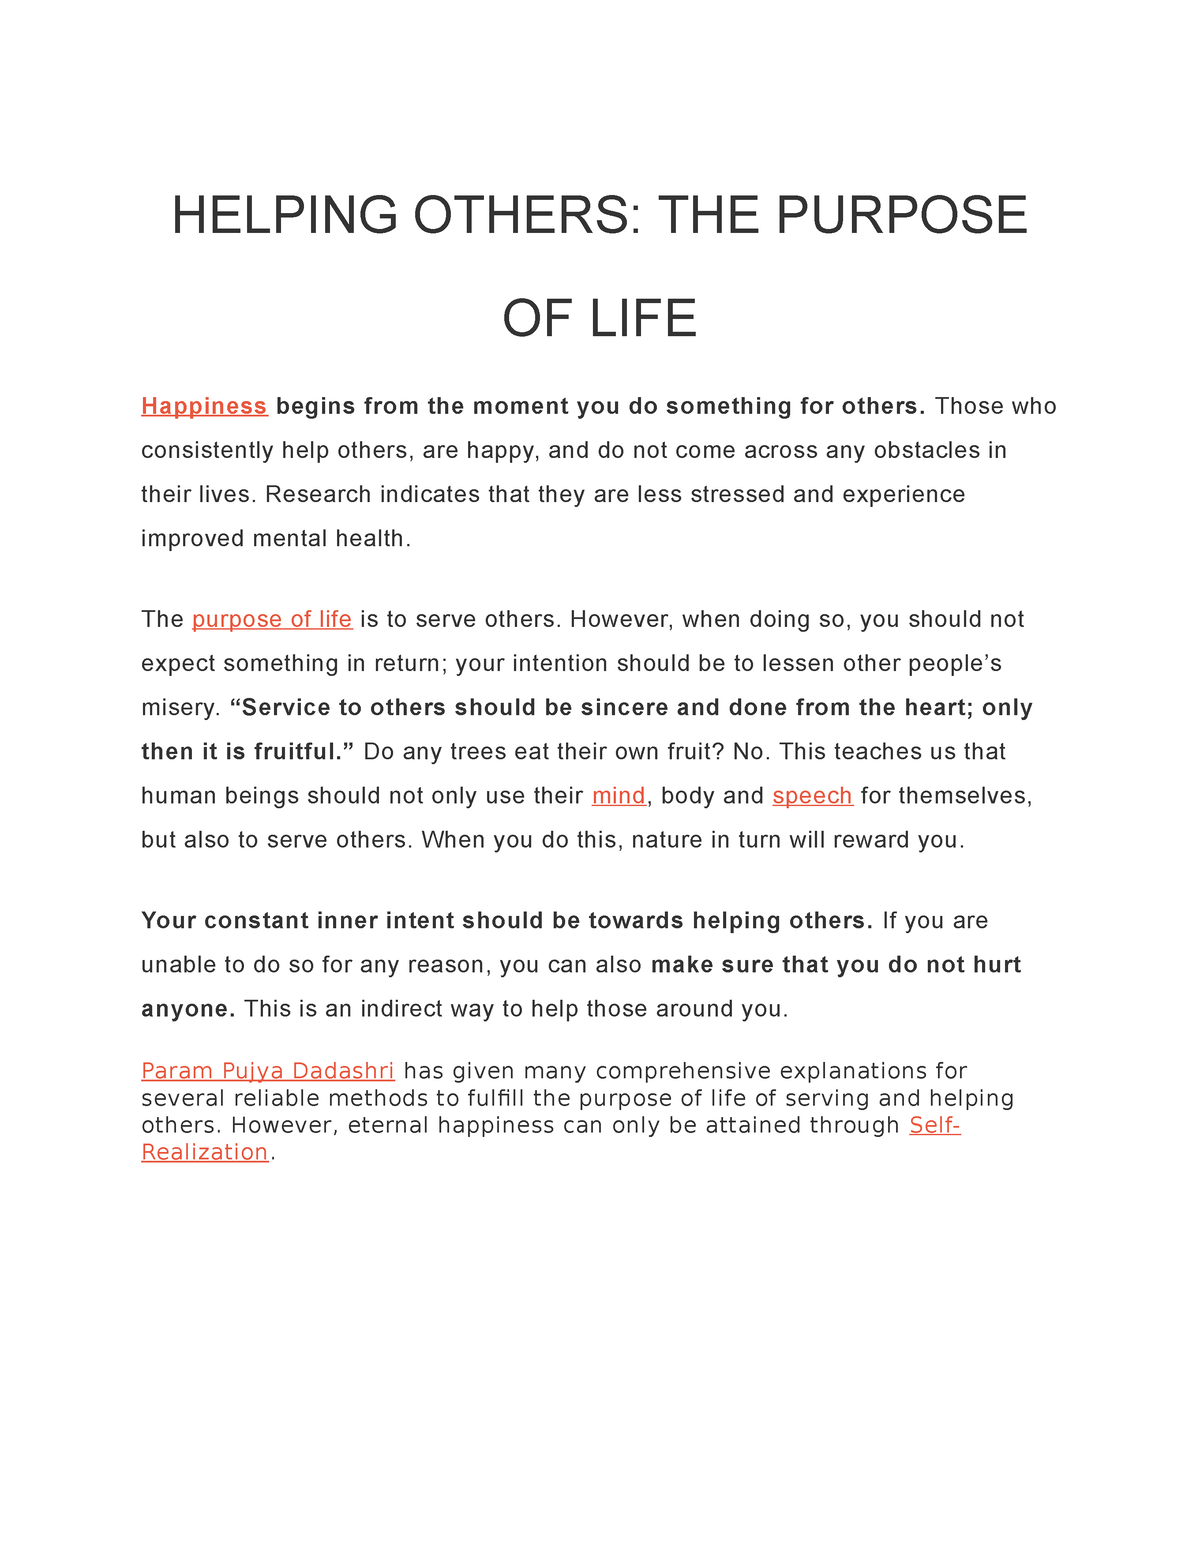 passion for helping others essay